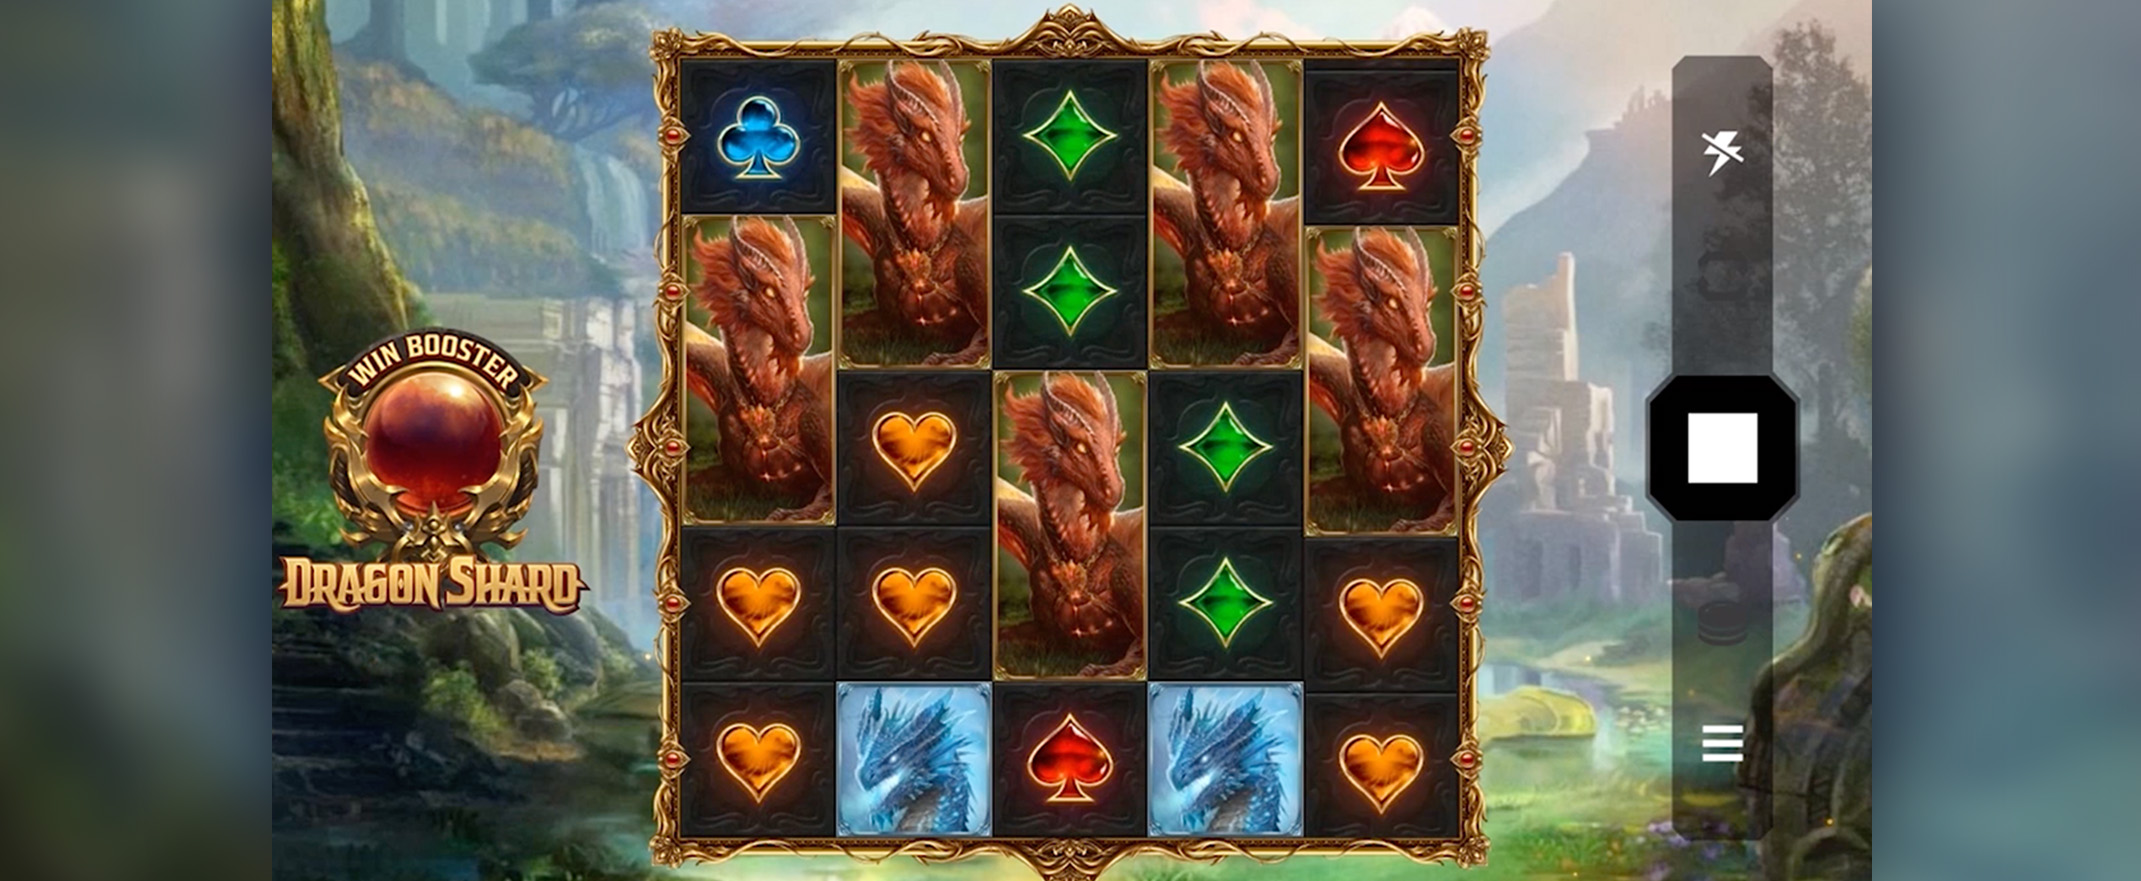 Dragon Shard video slots from Microgaming and Stormcraft Studios